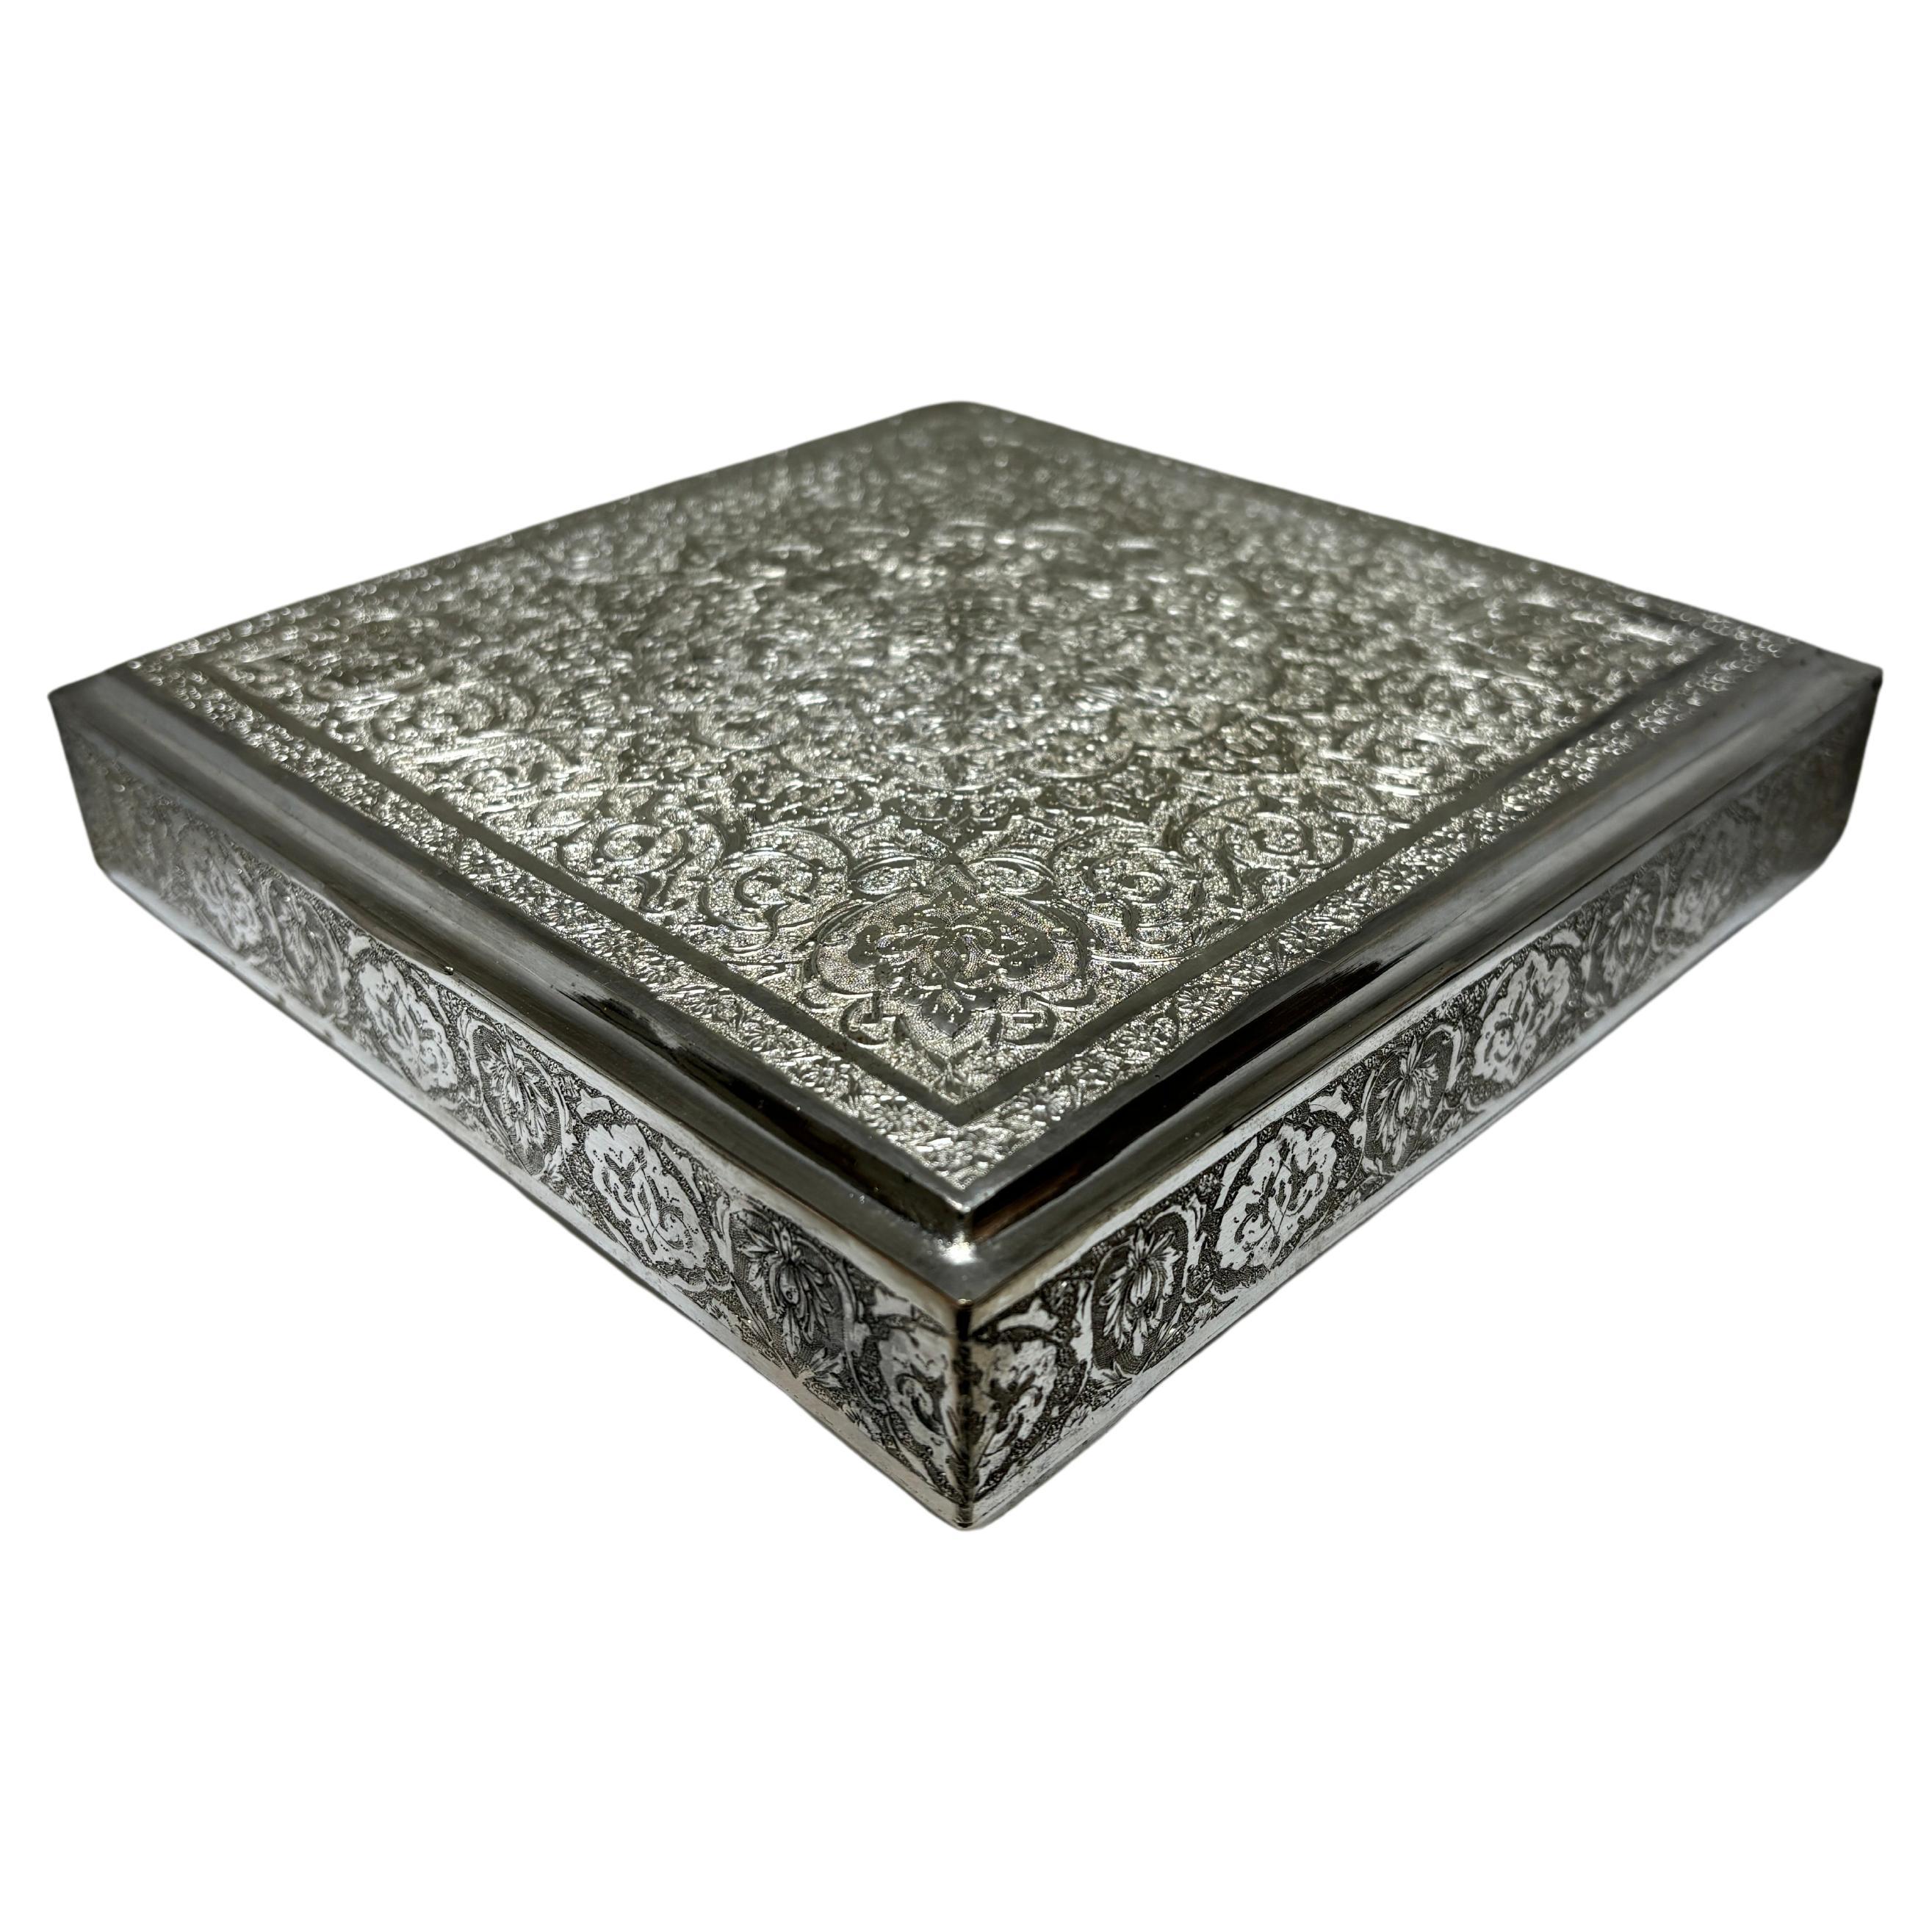 Heavily Decorated Persian Islamic Hand Chased Silver Trinket, Jewelry Box For Sale